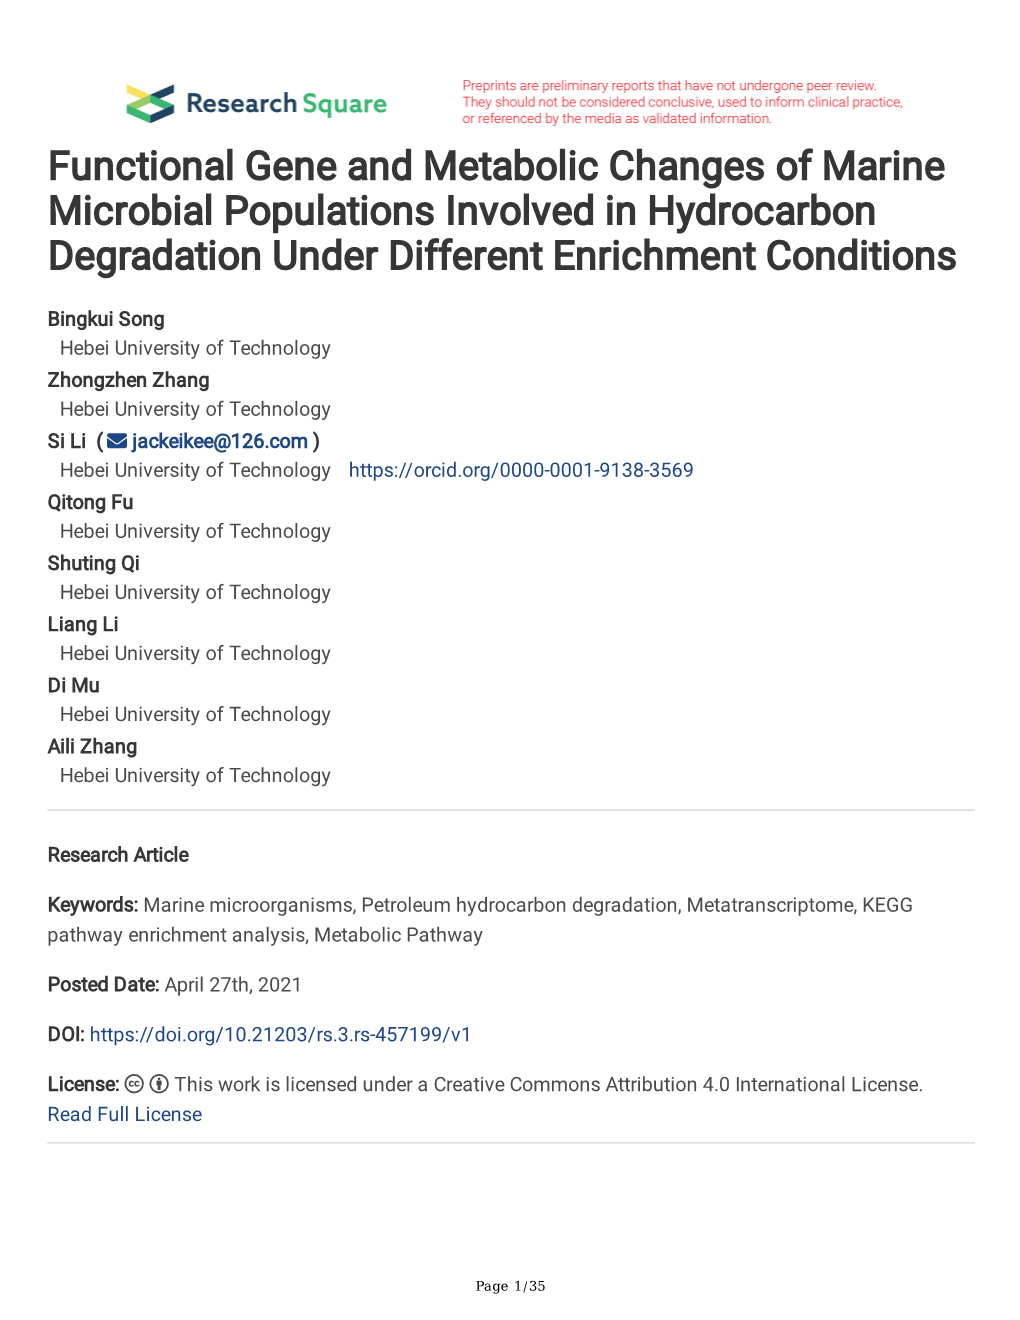 Functional Gene and Metabolic Changes of Marine Microbial Populations Involved in Hydrocarbon Degradation Under Different Enrichment Conditions